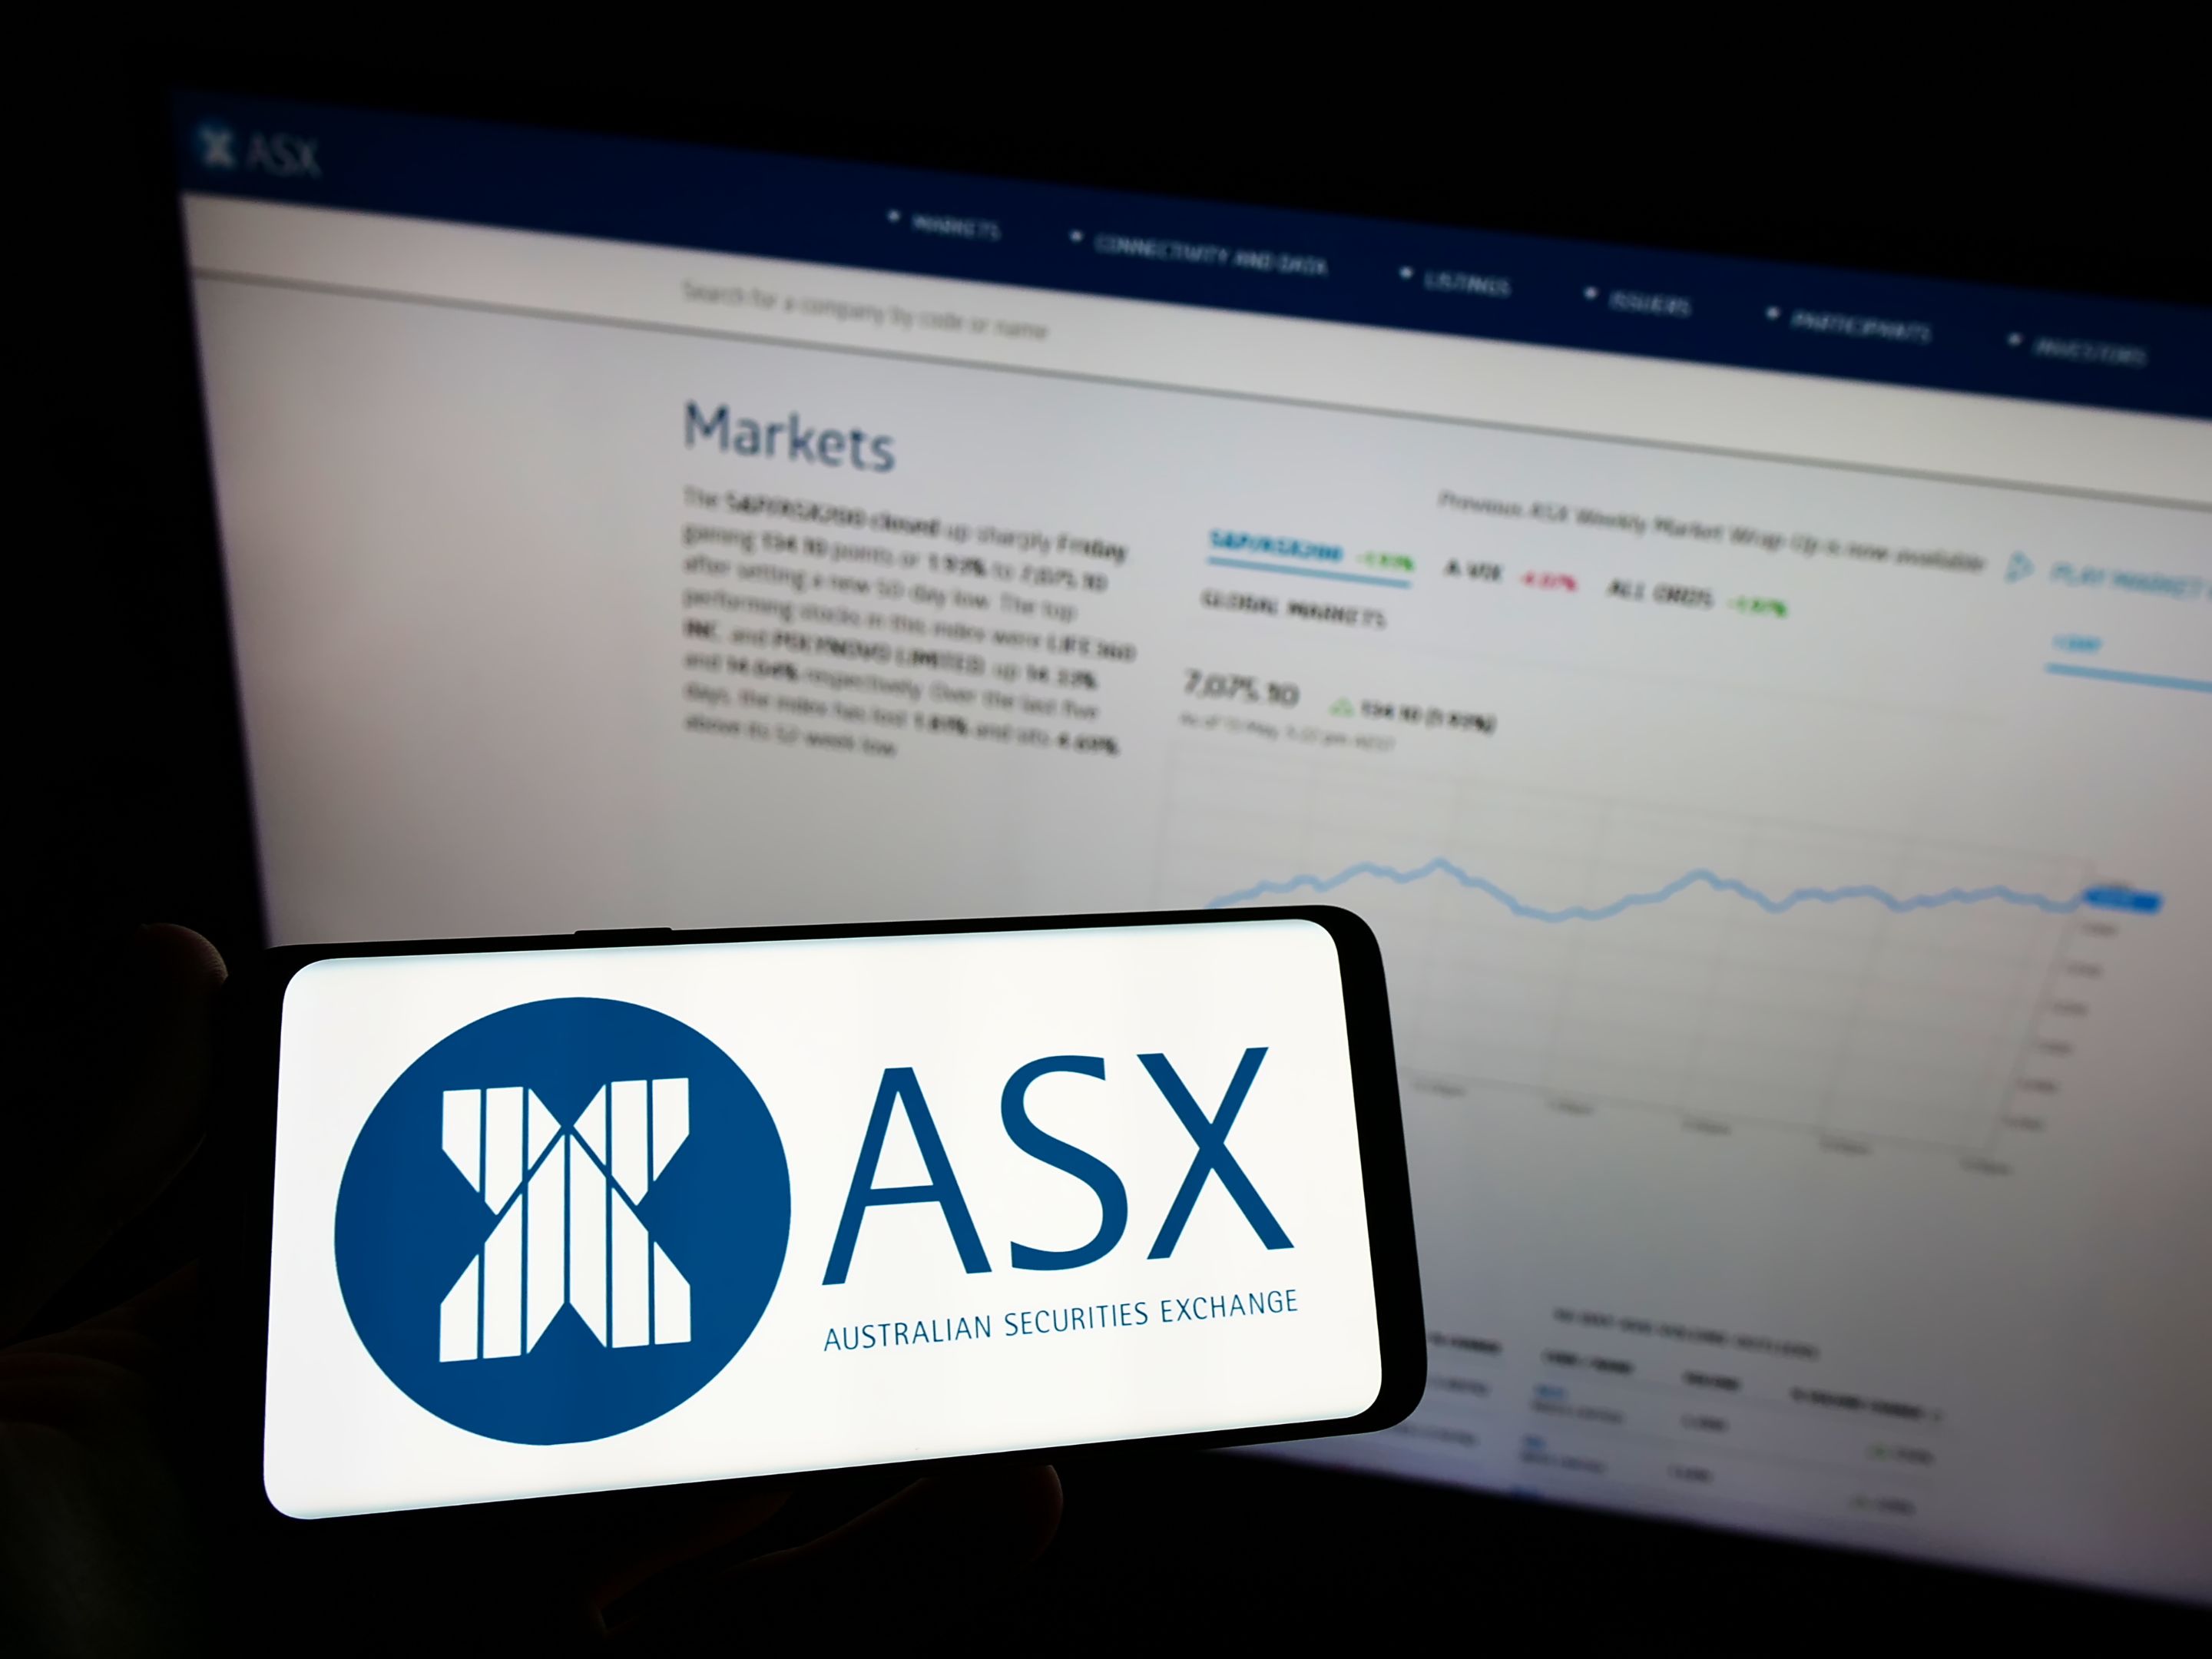 Stuttgart, Germany - 05-15-2022: Person holding mobile phone with logo of Australian Securities Exchange Ltd (ASX) on screen in front of business web page. Focus on phone display.